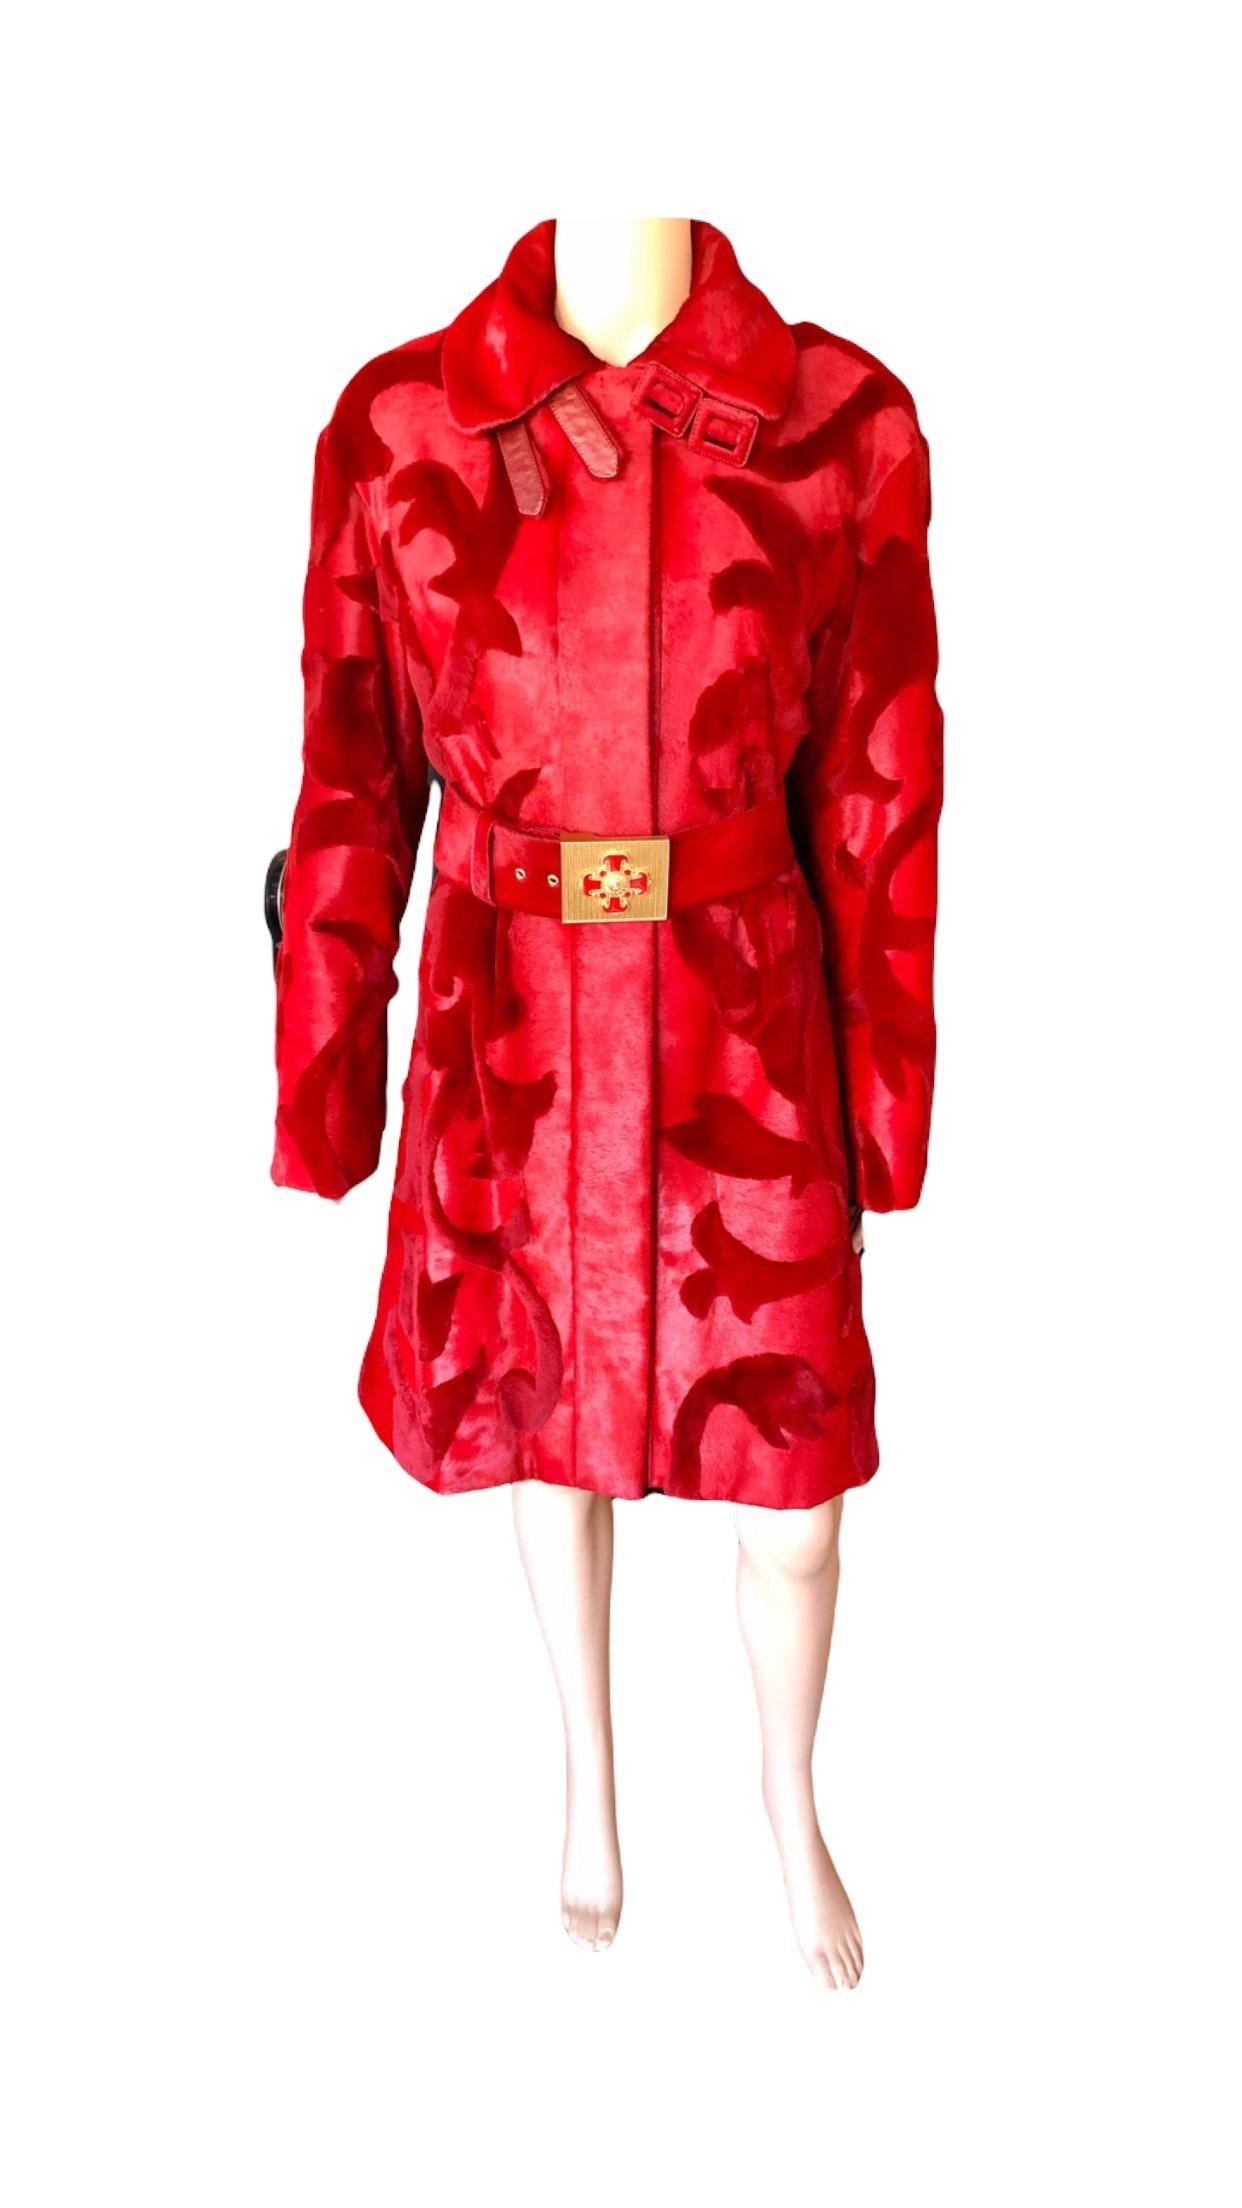 Versace F/W 2011 Runway Mink Fur and Leather Belted Knee-Length Red Jacket Coat For Sale 7